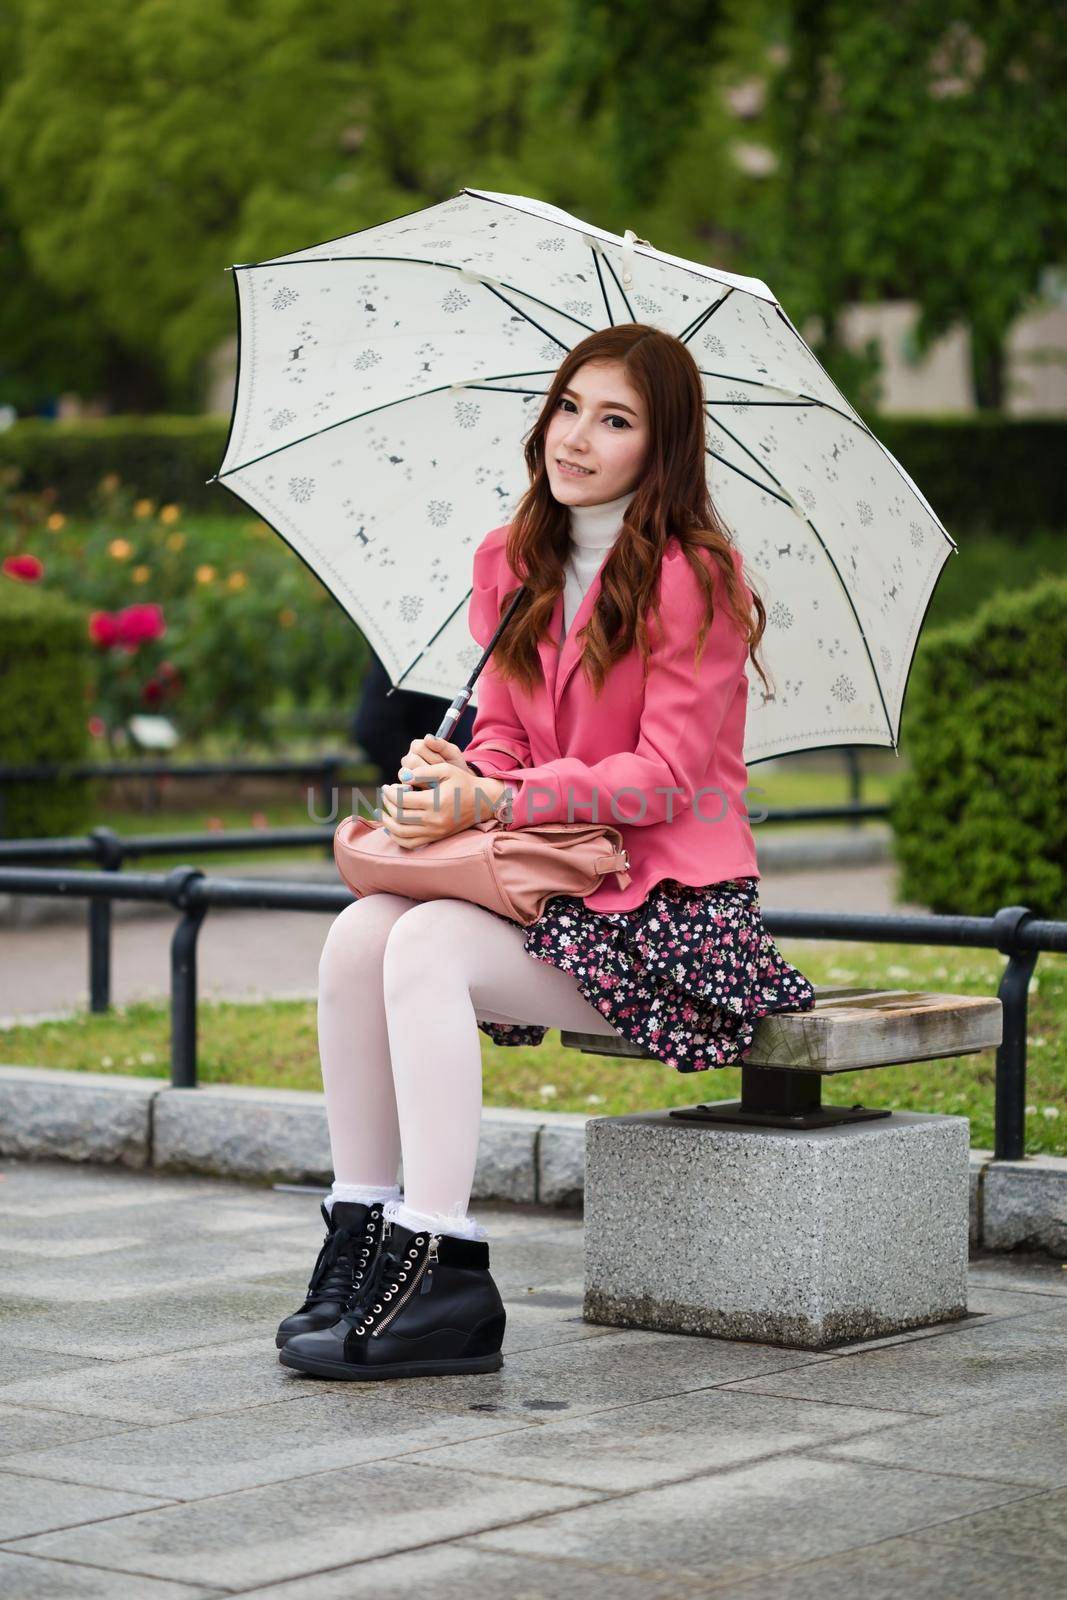 beautiful woman happy with umbrella in the garden